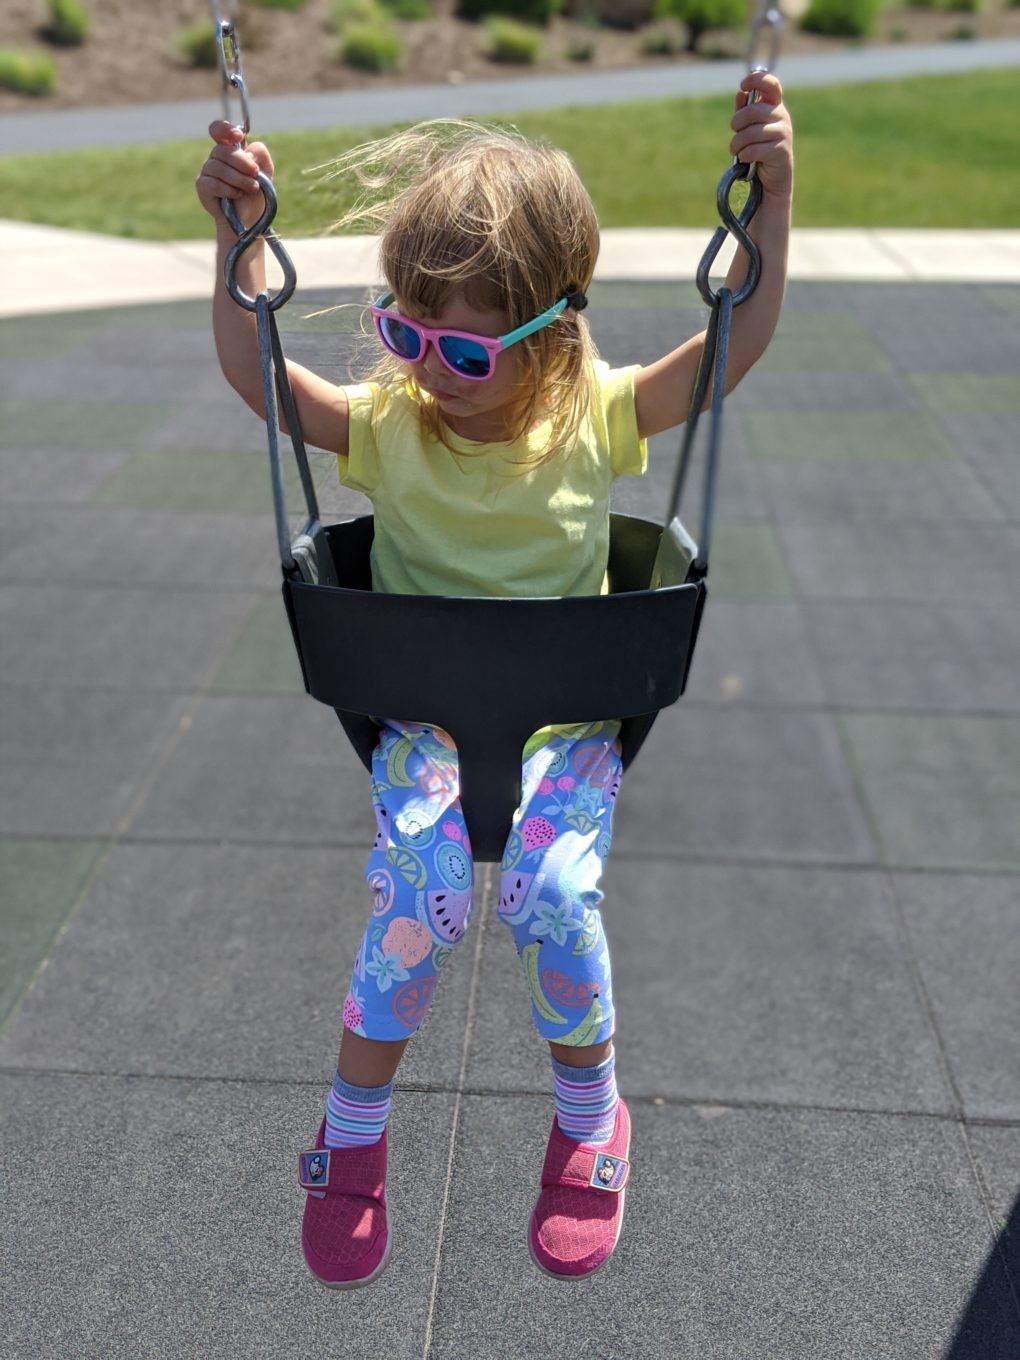 How to keep kids safe in the sun and during playtime.